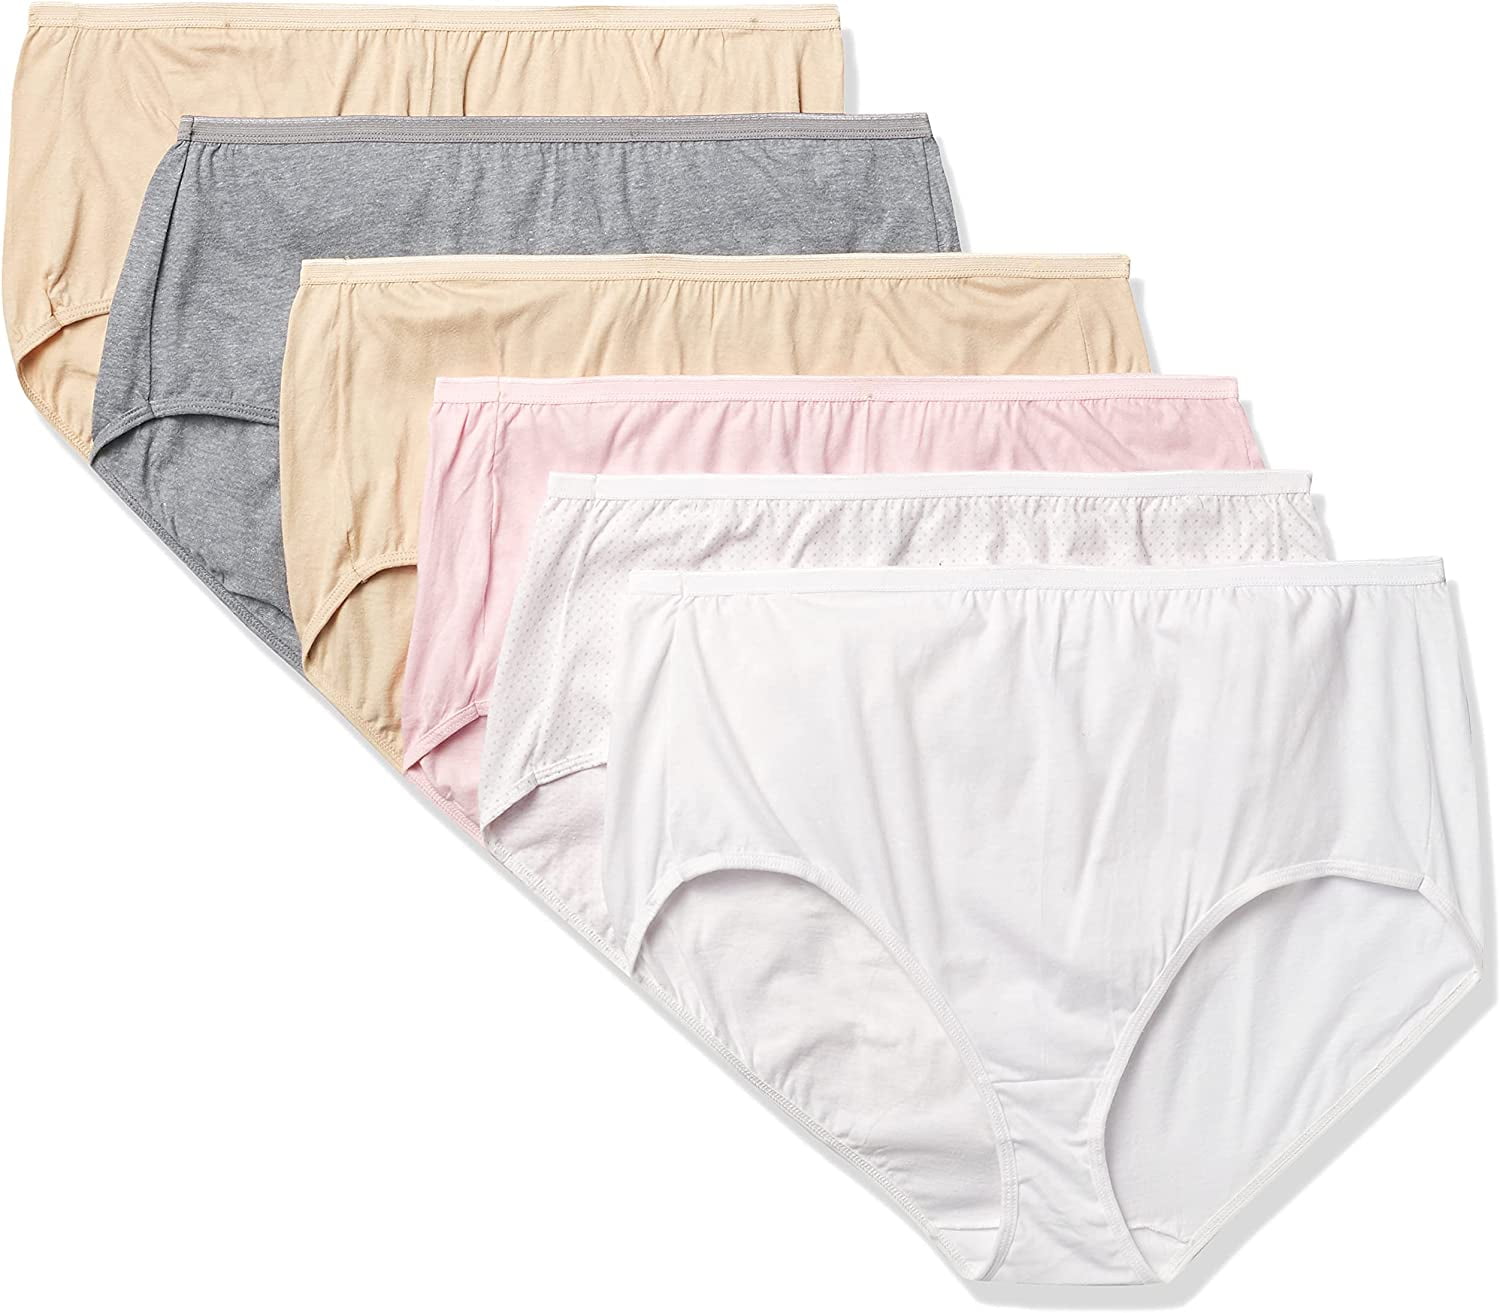 Hanes Just My Size Women's Cotton Briefs, 6-Pack (Plus ) Assorted 10 